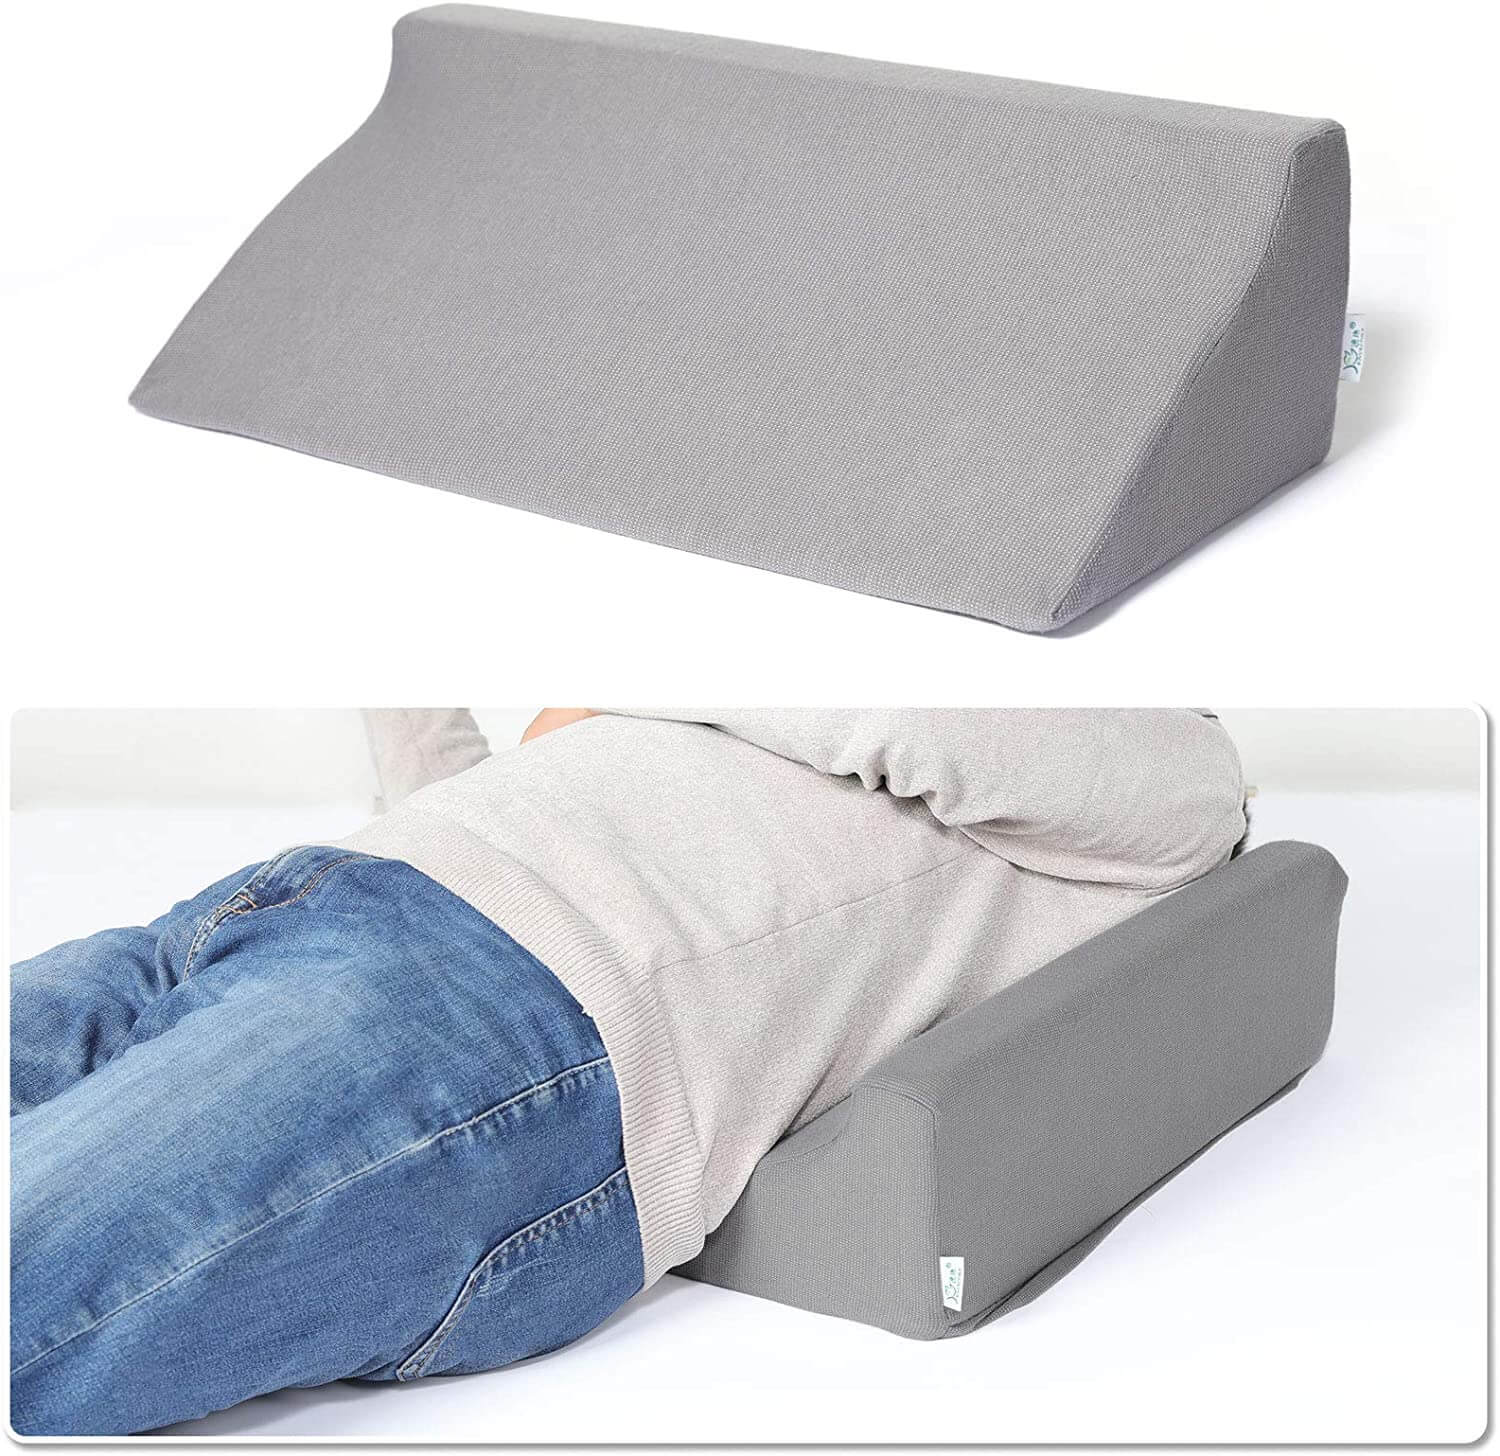 Support wedge pillow for sitting in the bed, feature image